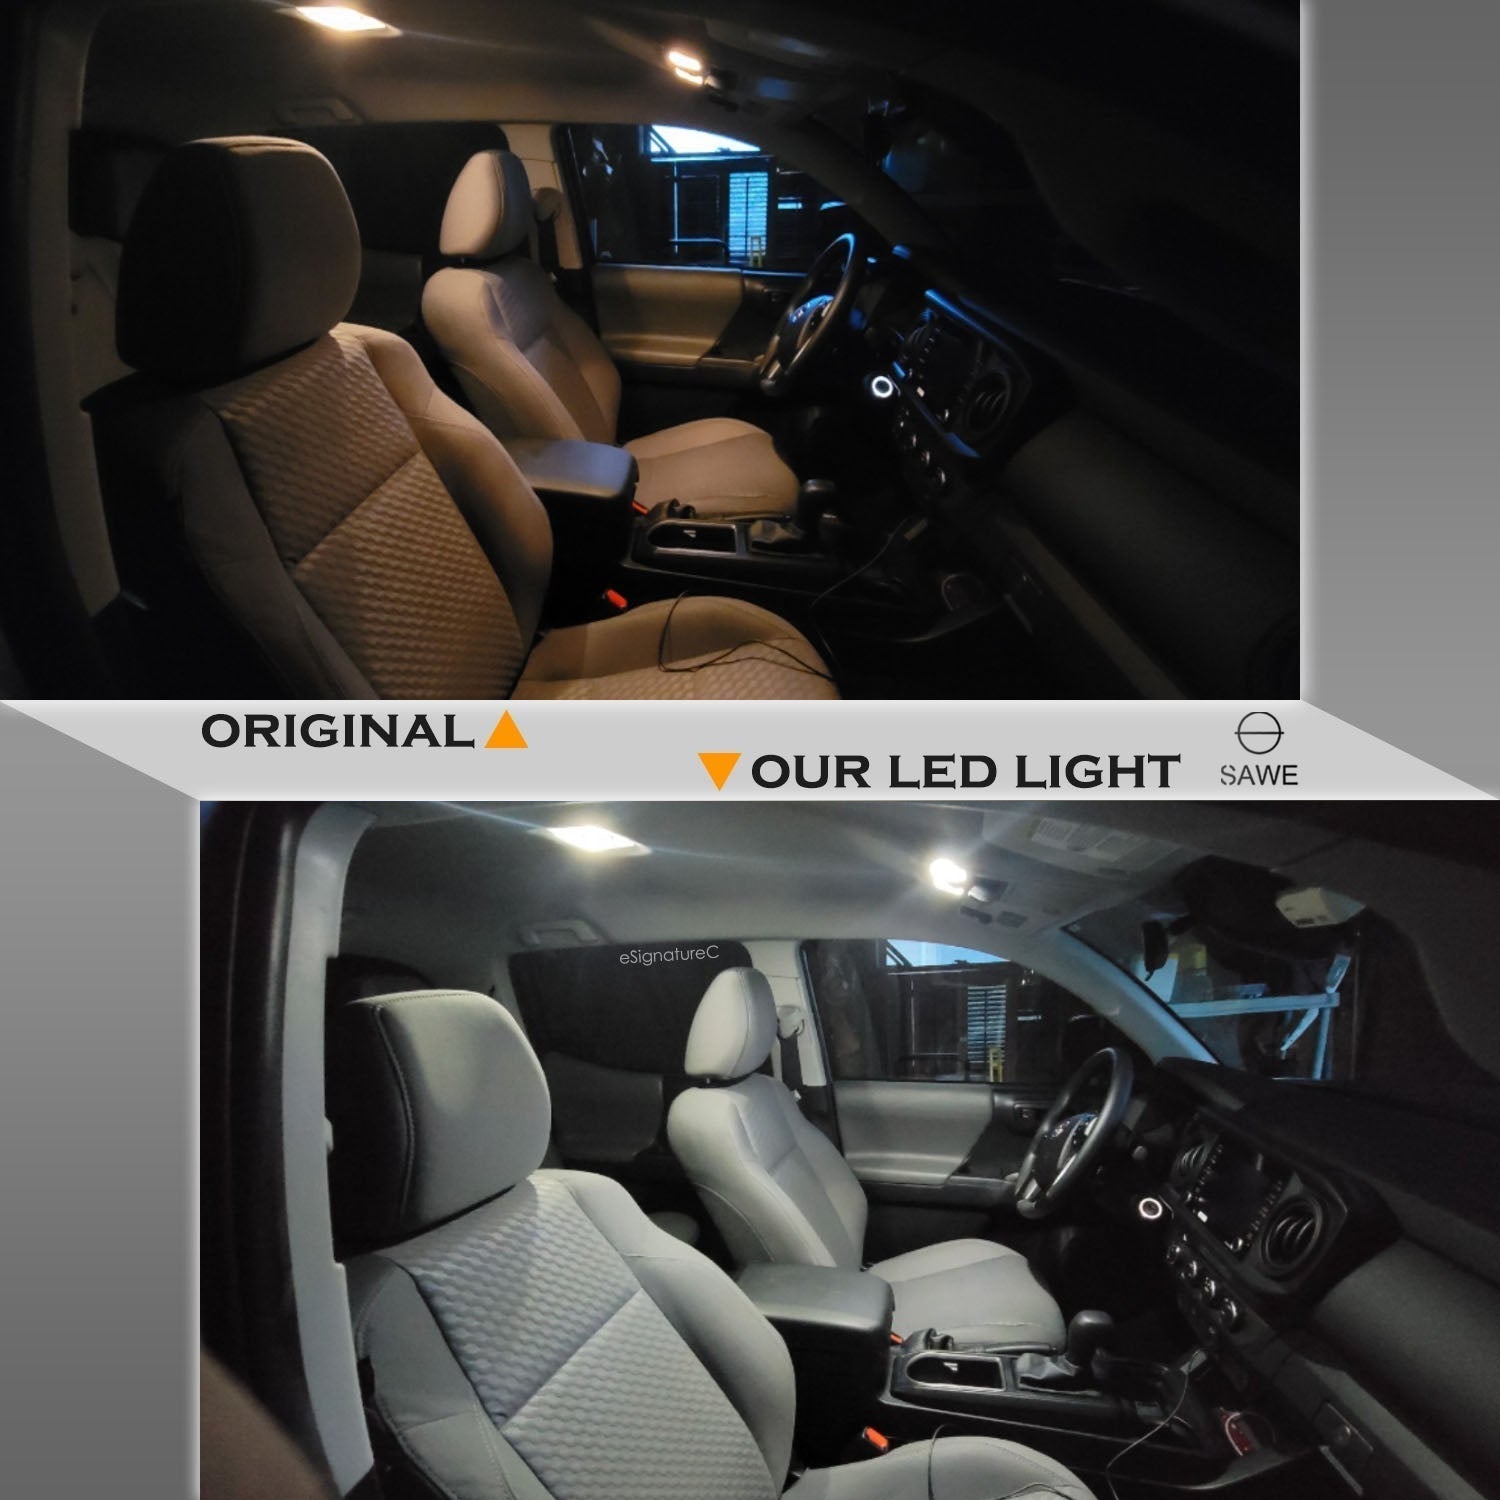 For Cadillac SRX Interior LED Lights - Dome & Map Light Bulbs Package Kit for 2010 - 2016 - White